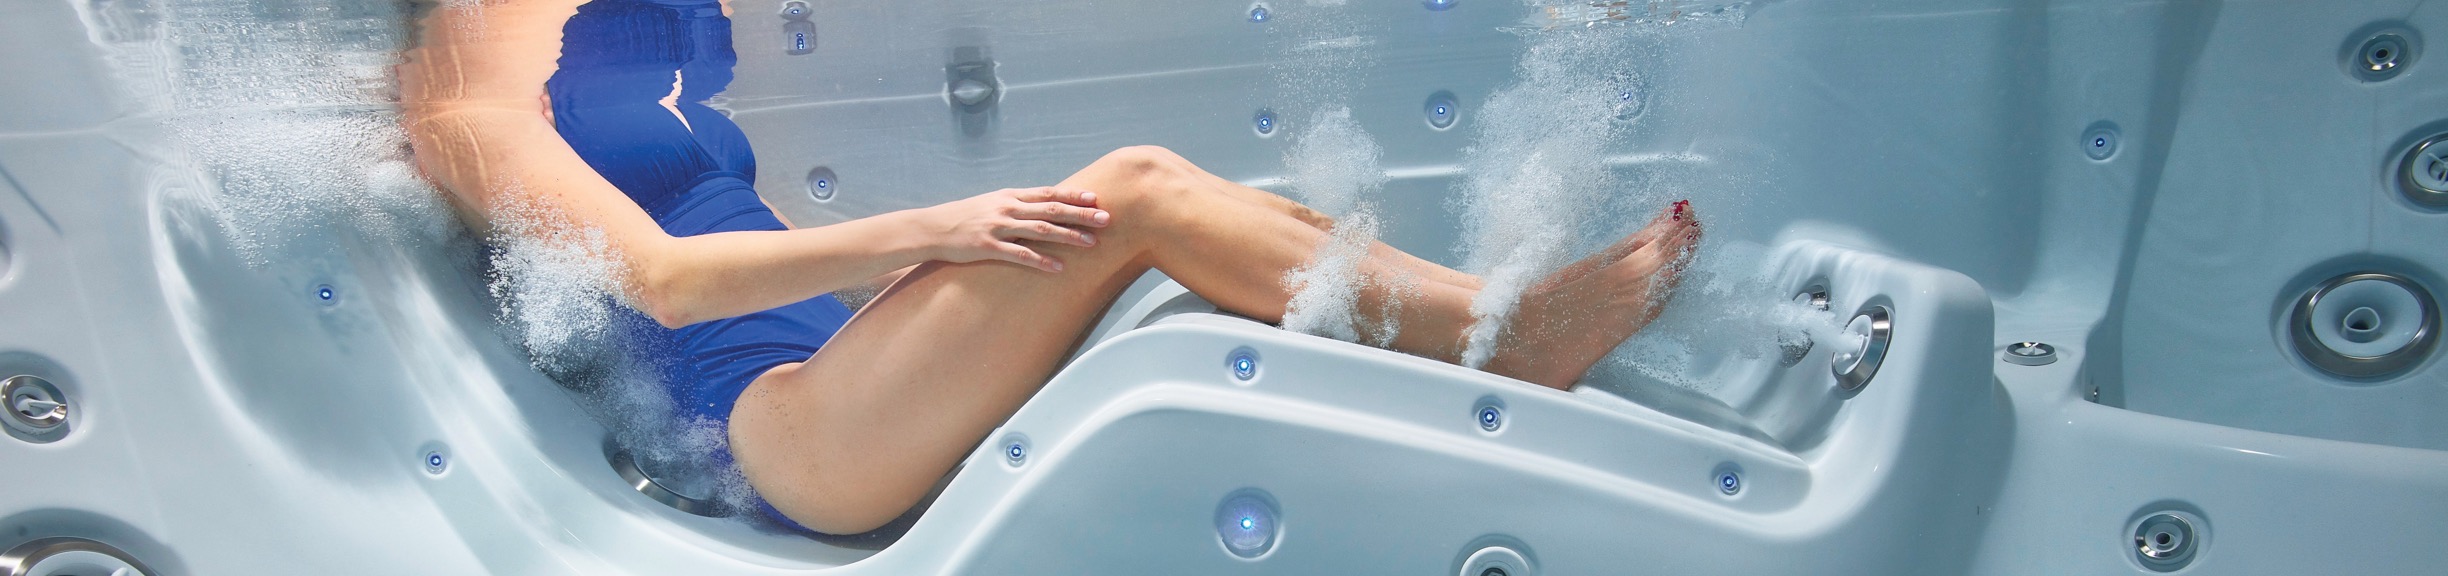 How Often Should I Use A Hot Tub? Take The Daily Soak Challenge!